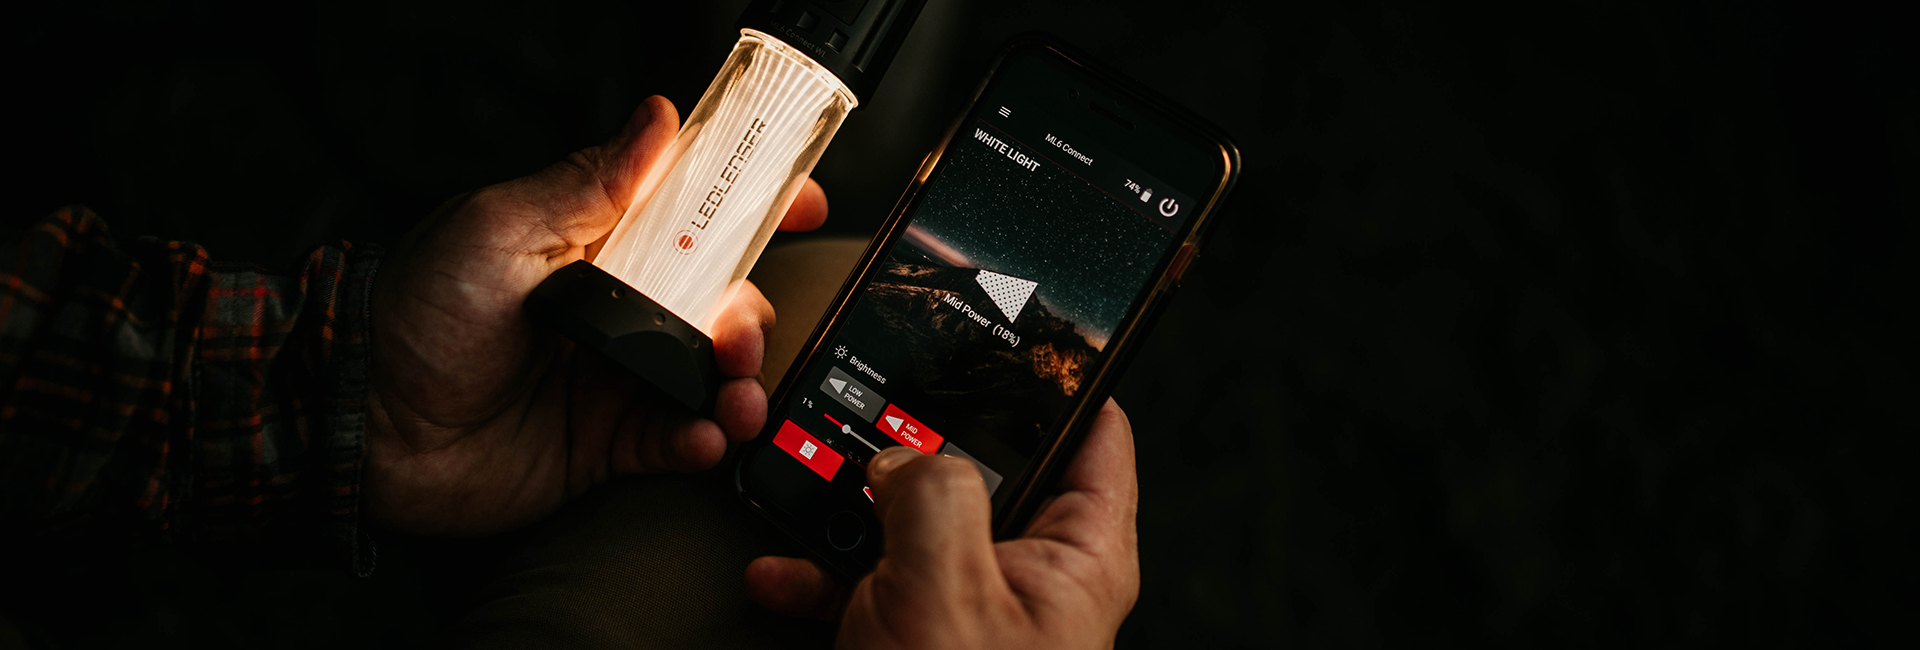 Camping Light with Smartphone App